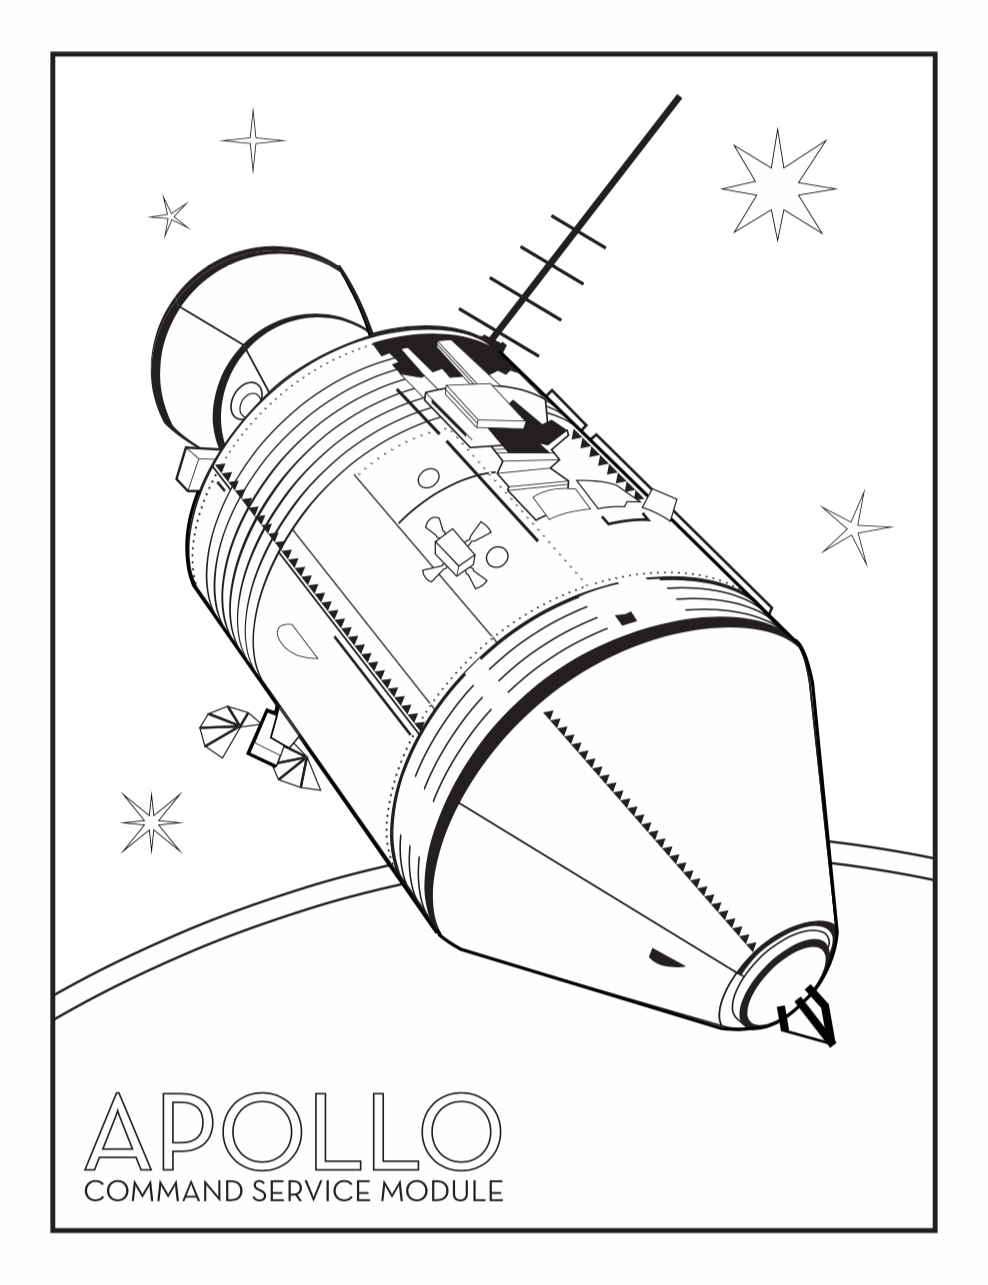 Beyond: A Coloring Book of Space Exploration